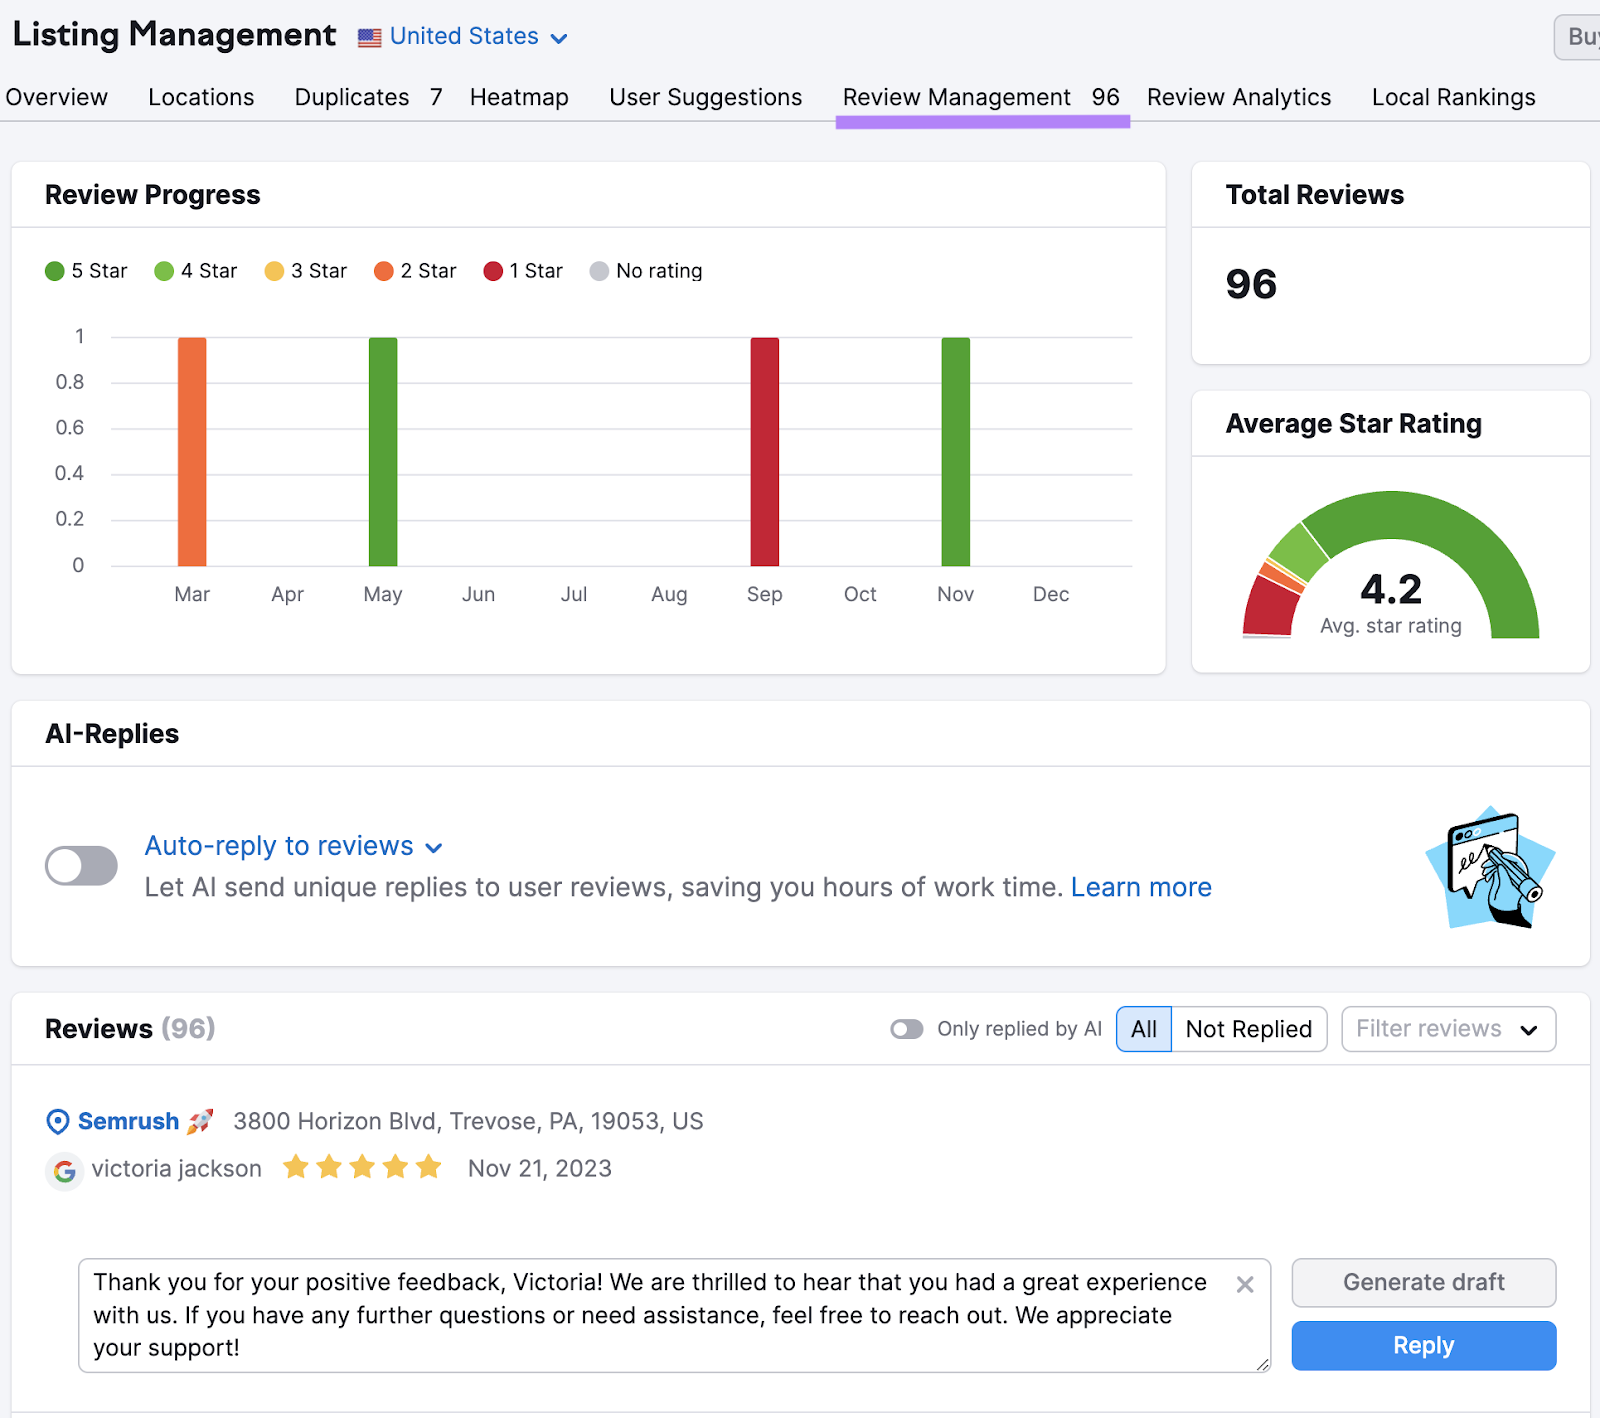 "Review Management" dashboard successful  Listing Management tool